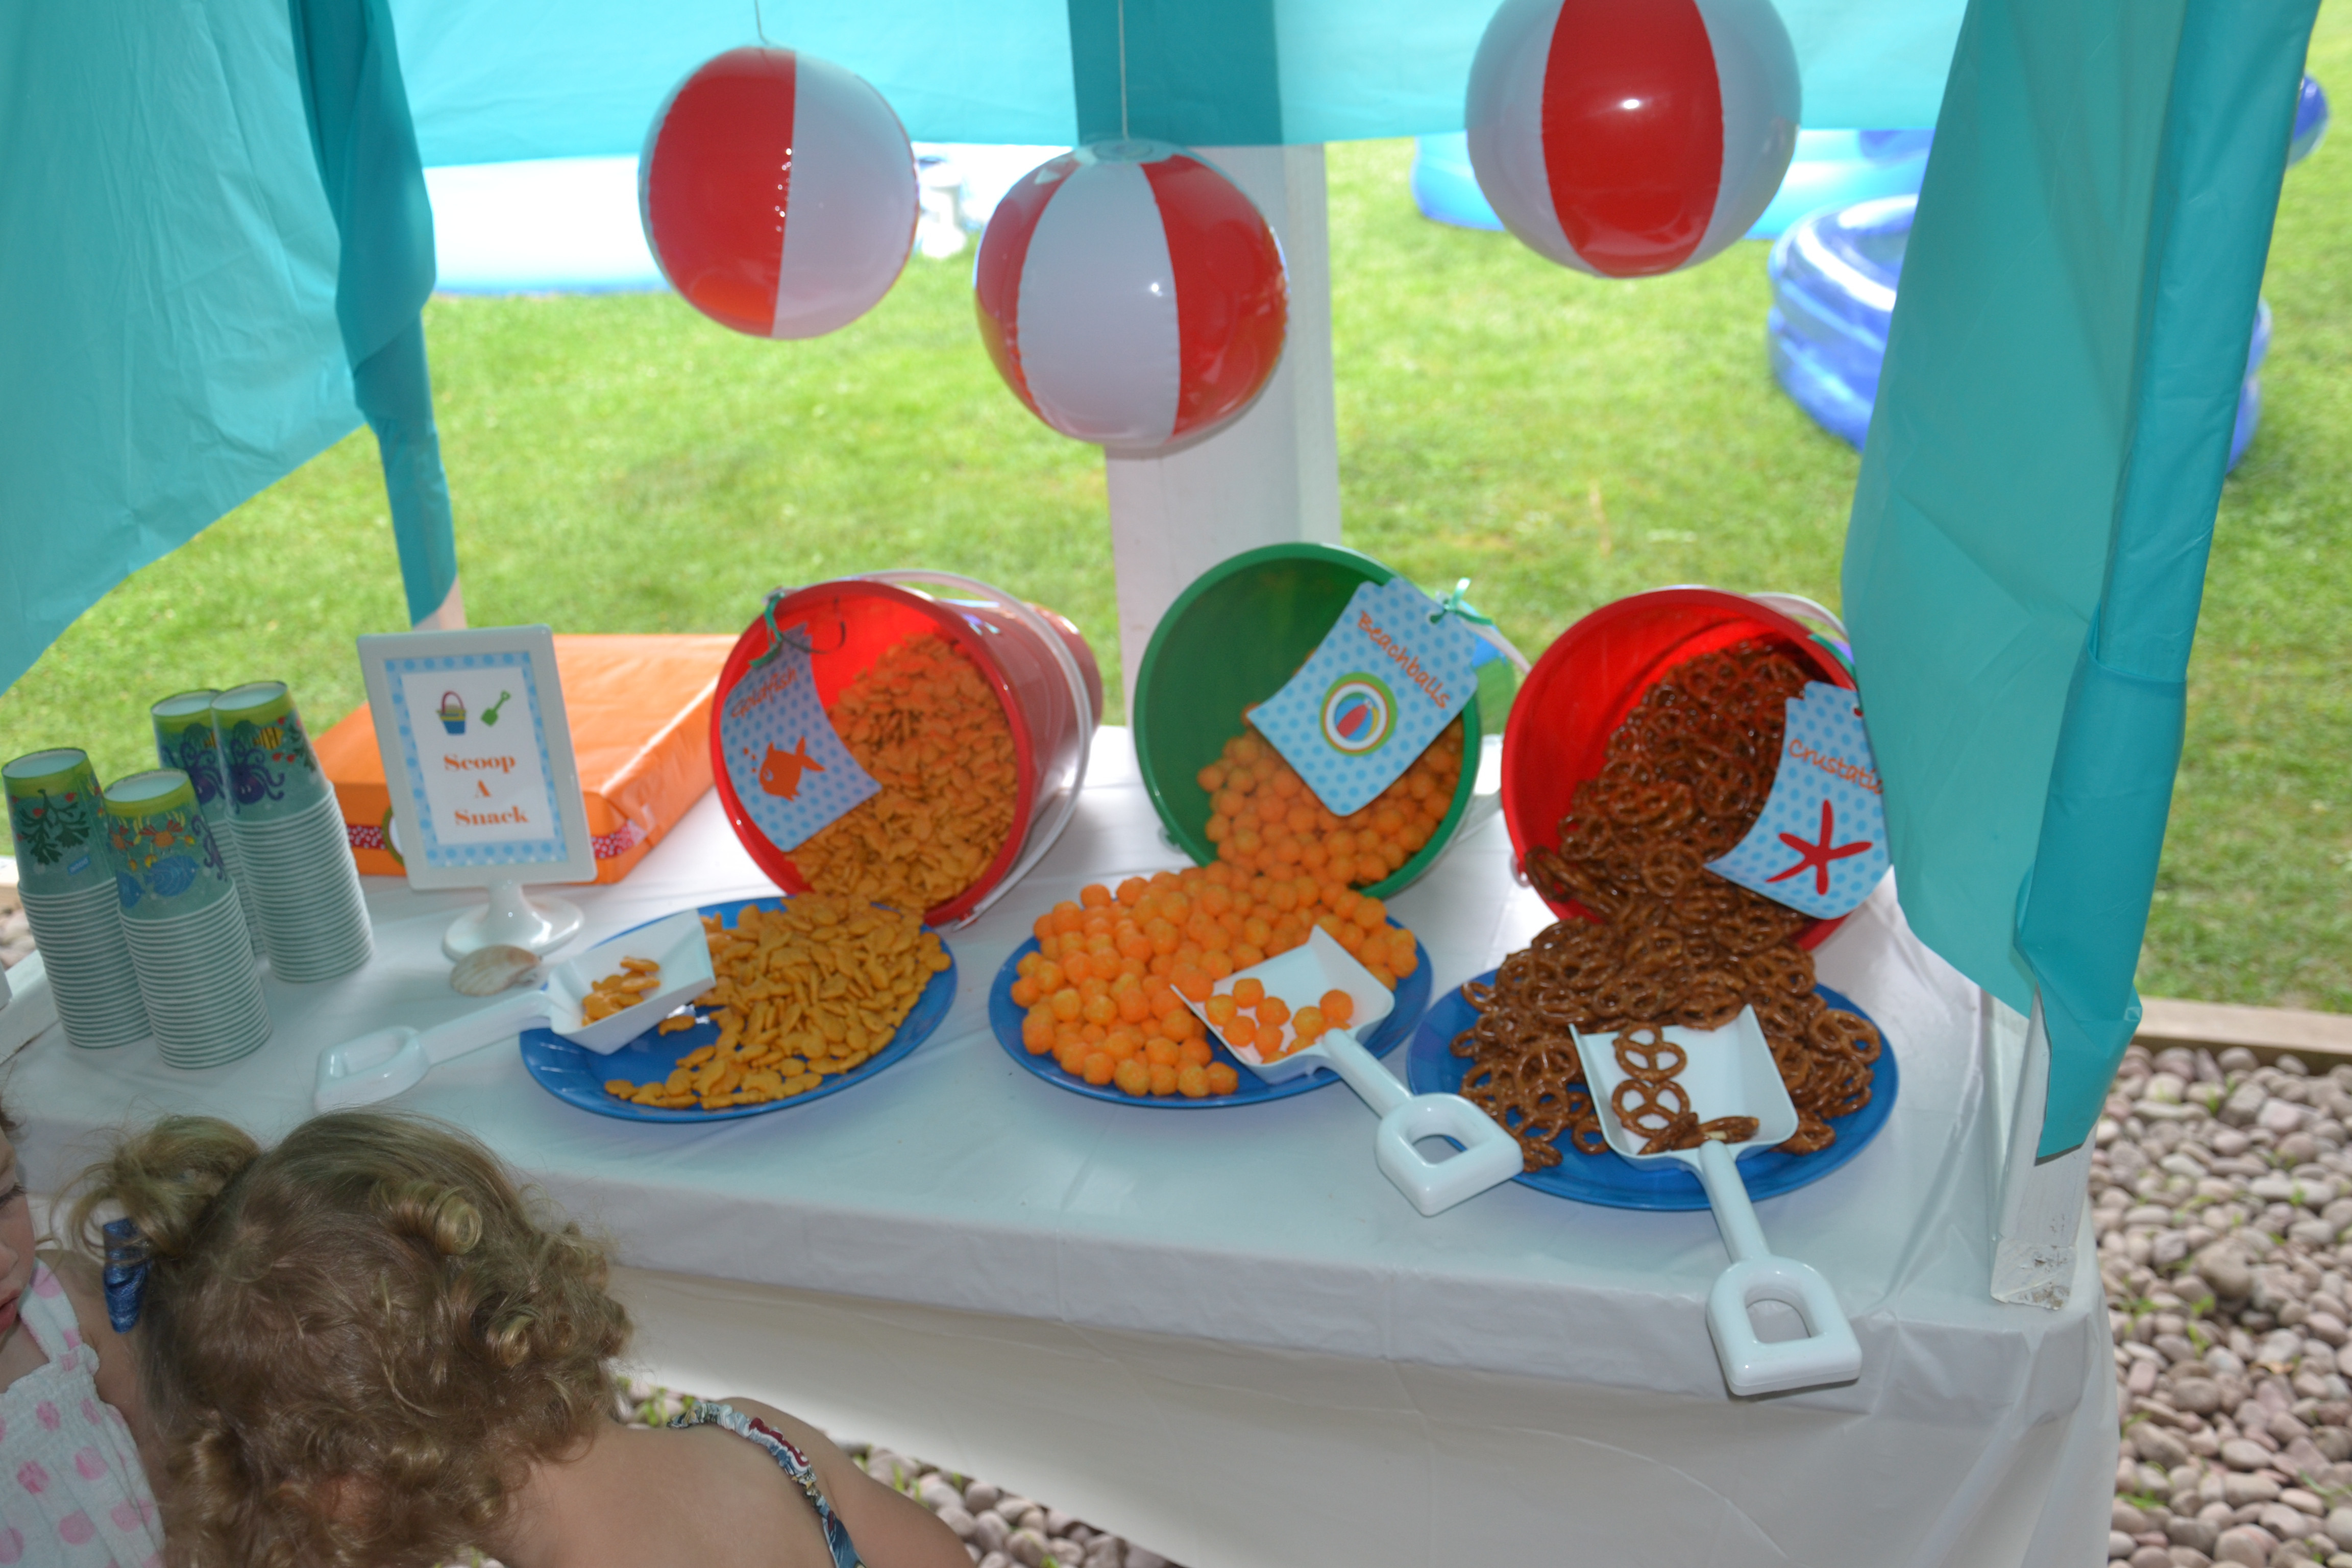 Beach Party Food Ideas Kids
 Party on a Bud  Ideas for Serving Summer Snacks